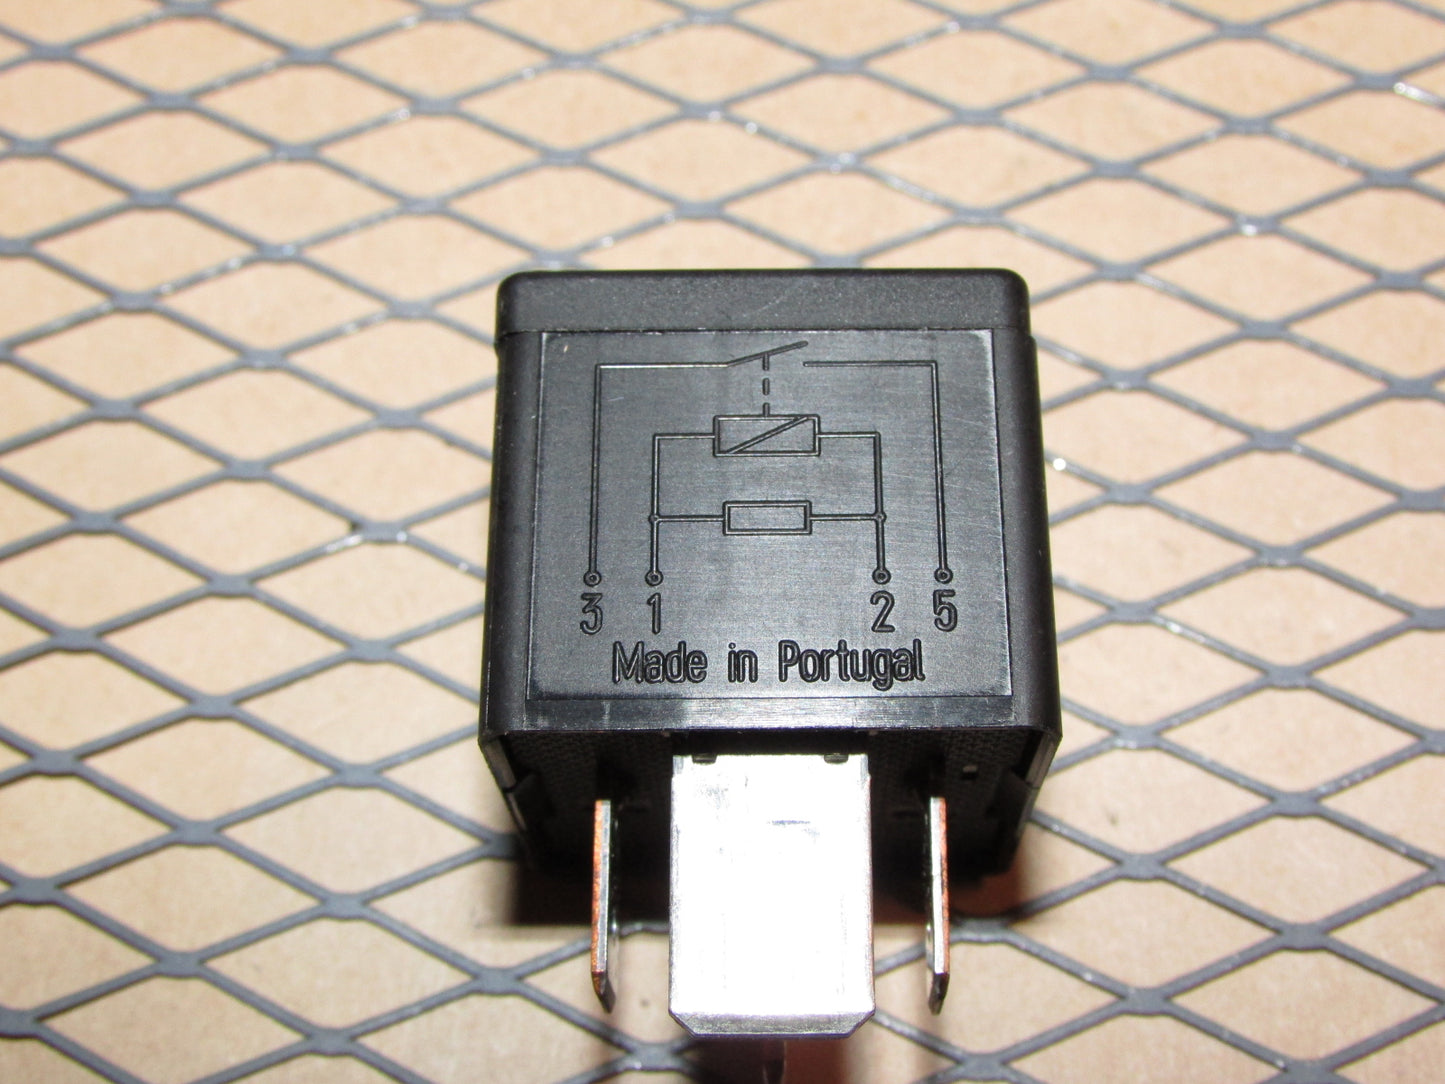 Universal Relay 100 7M0 951 253 A